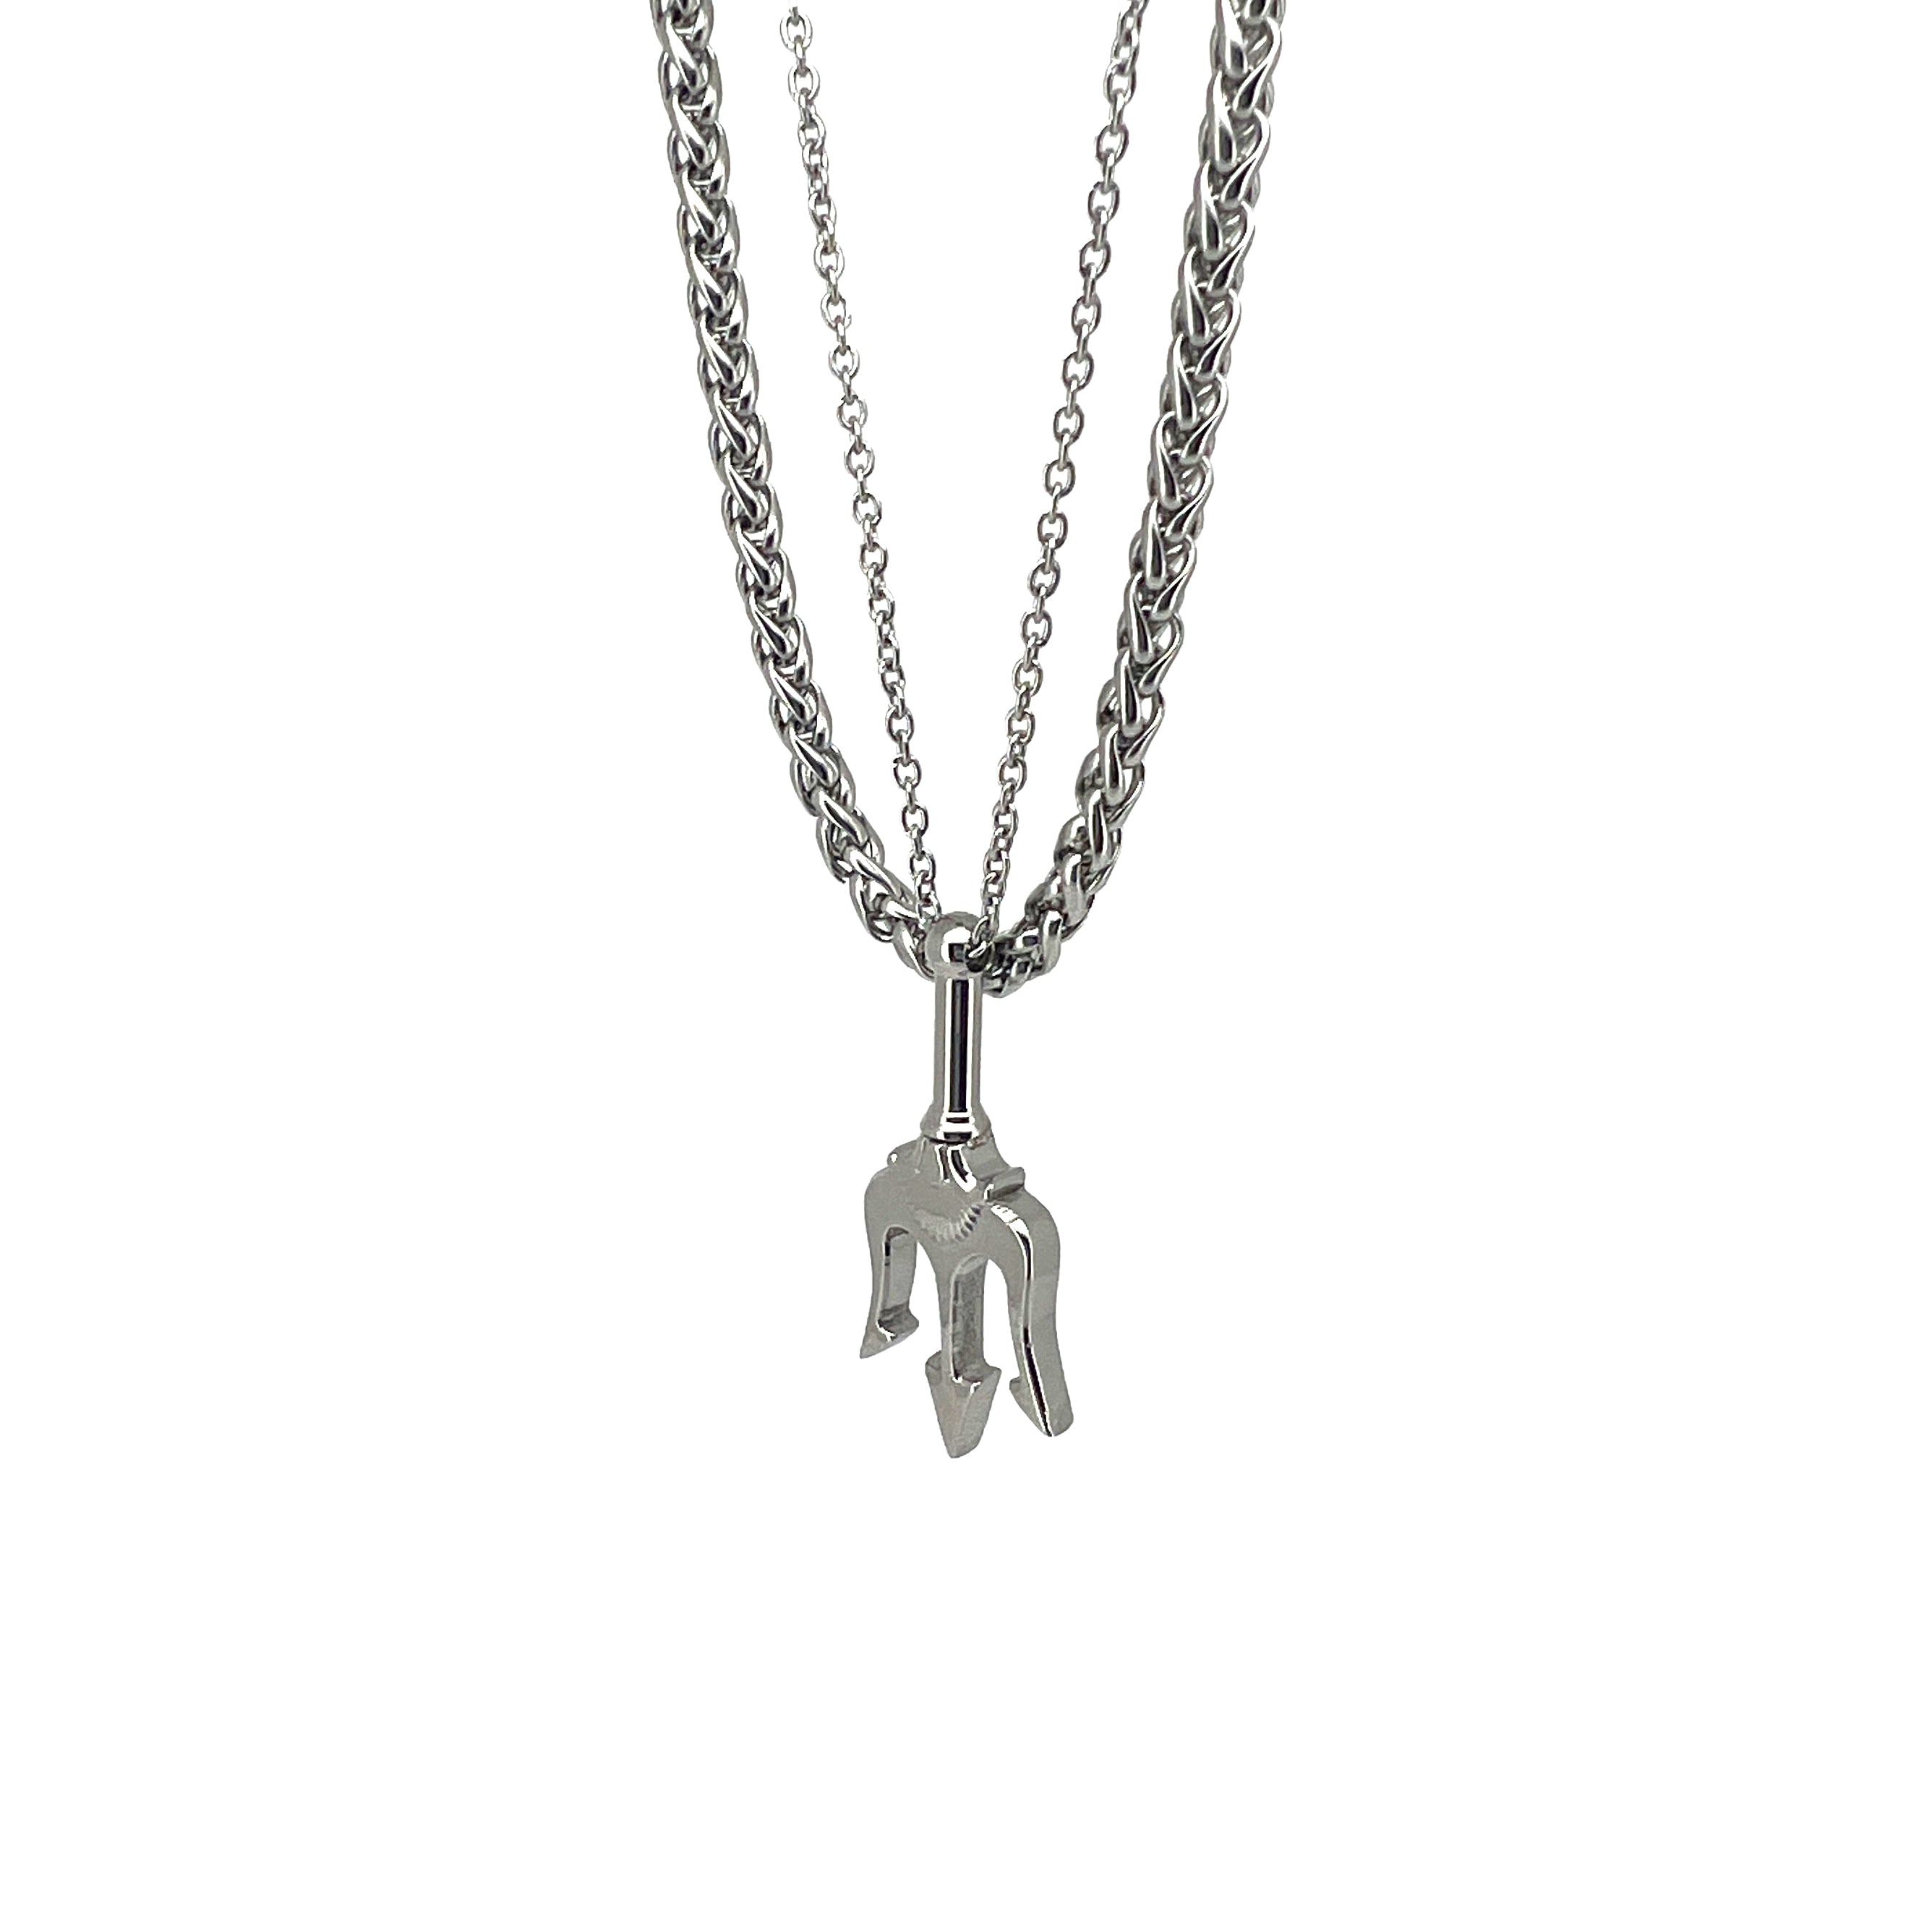 Ludvigs Stainless Steel Trident Pendant with Cable Chain Necklace